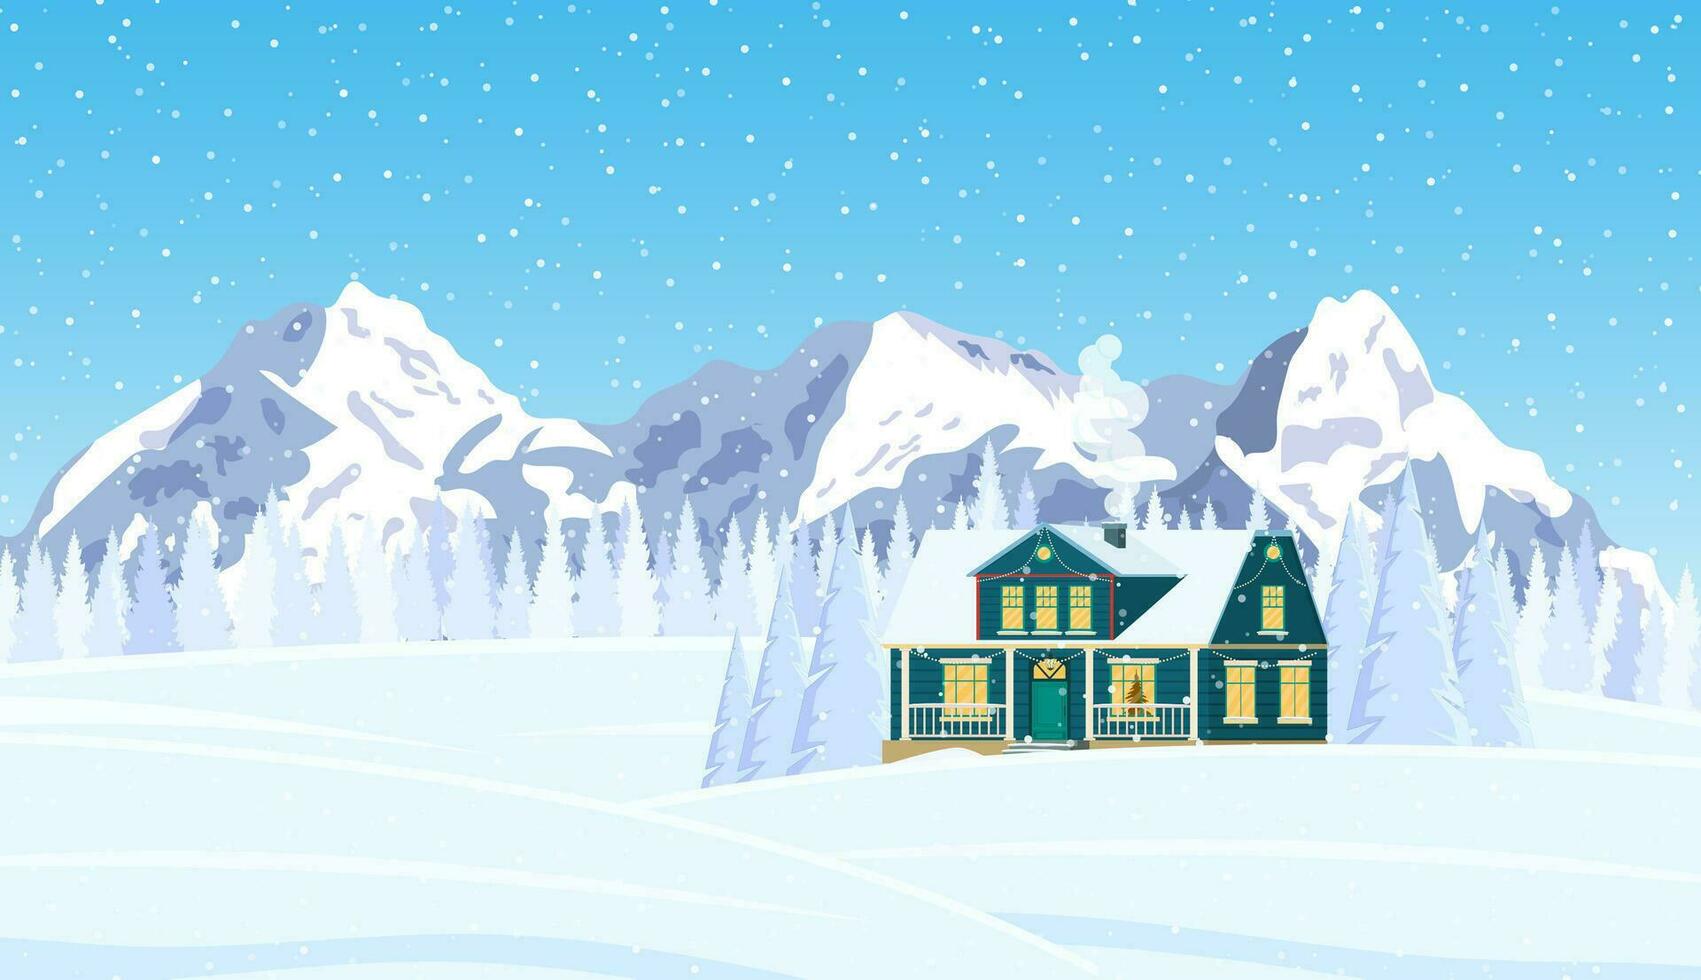 Decorated building for new year eve, home with lights and with fir tree prepared for christmas celebration. New year and xmas celebration. Vector illustration flat style